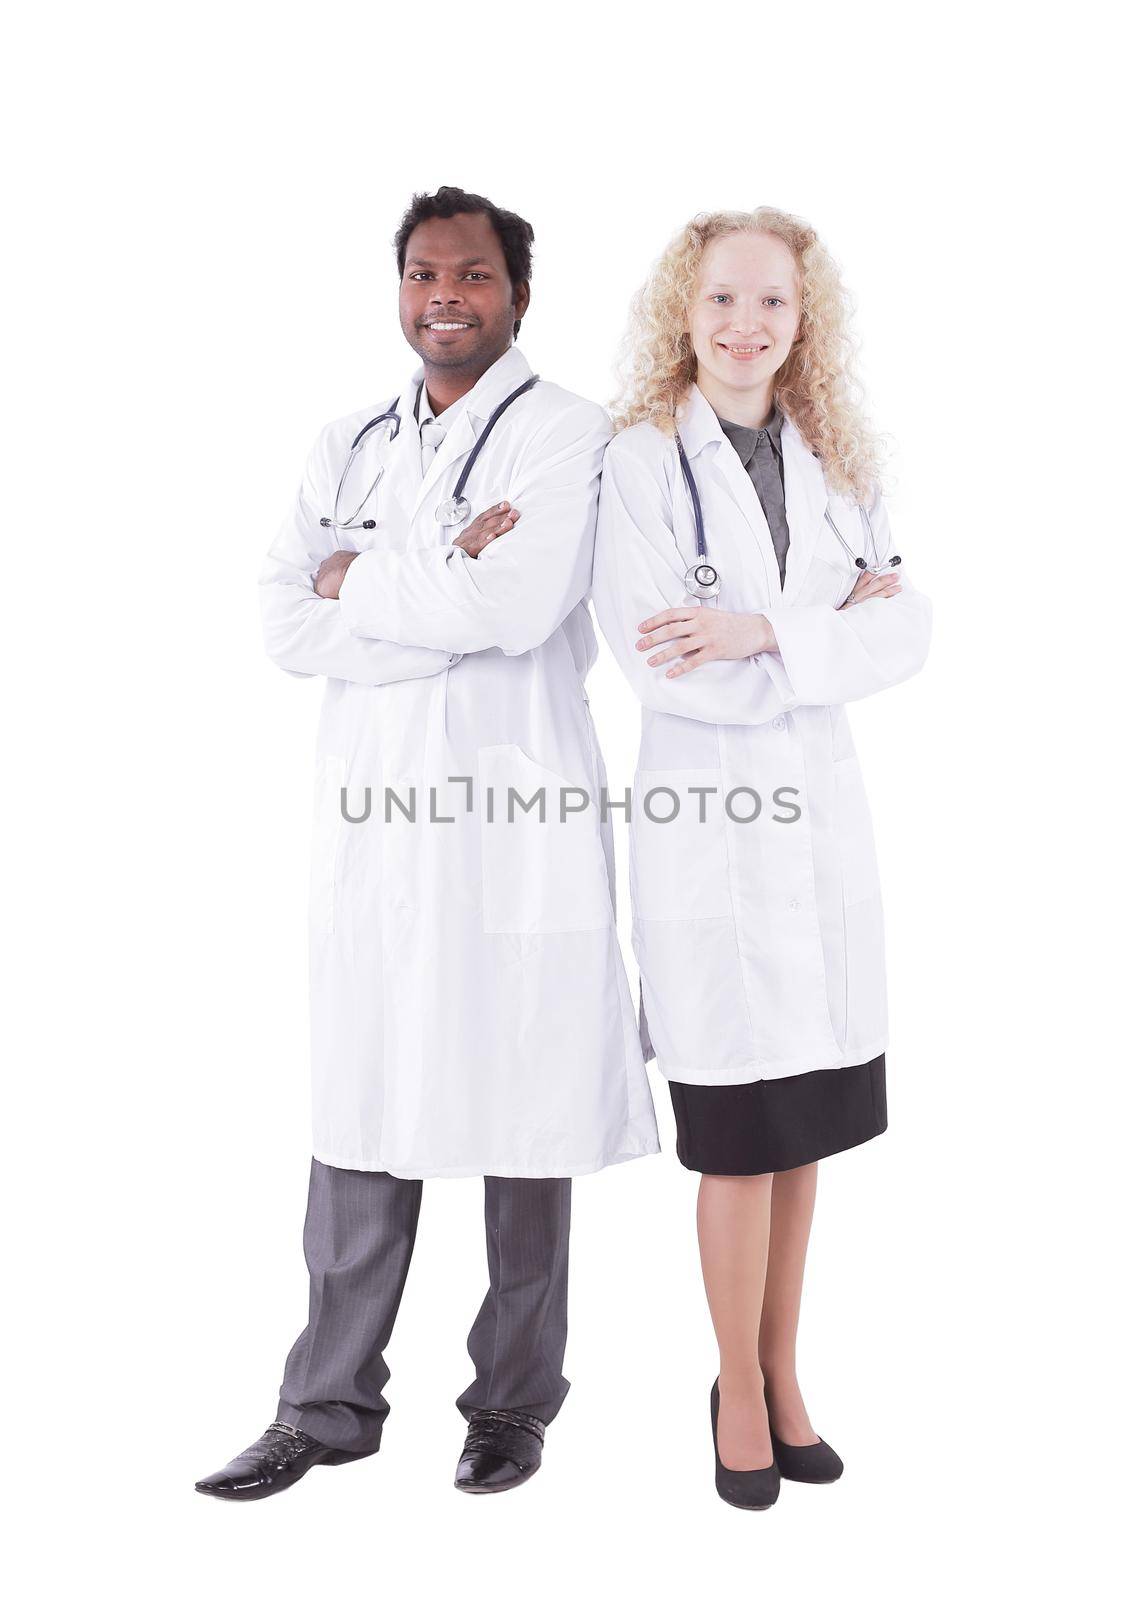 Full body portrait of two happy smiling young medical people, isolated over white background